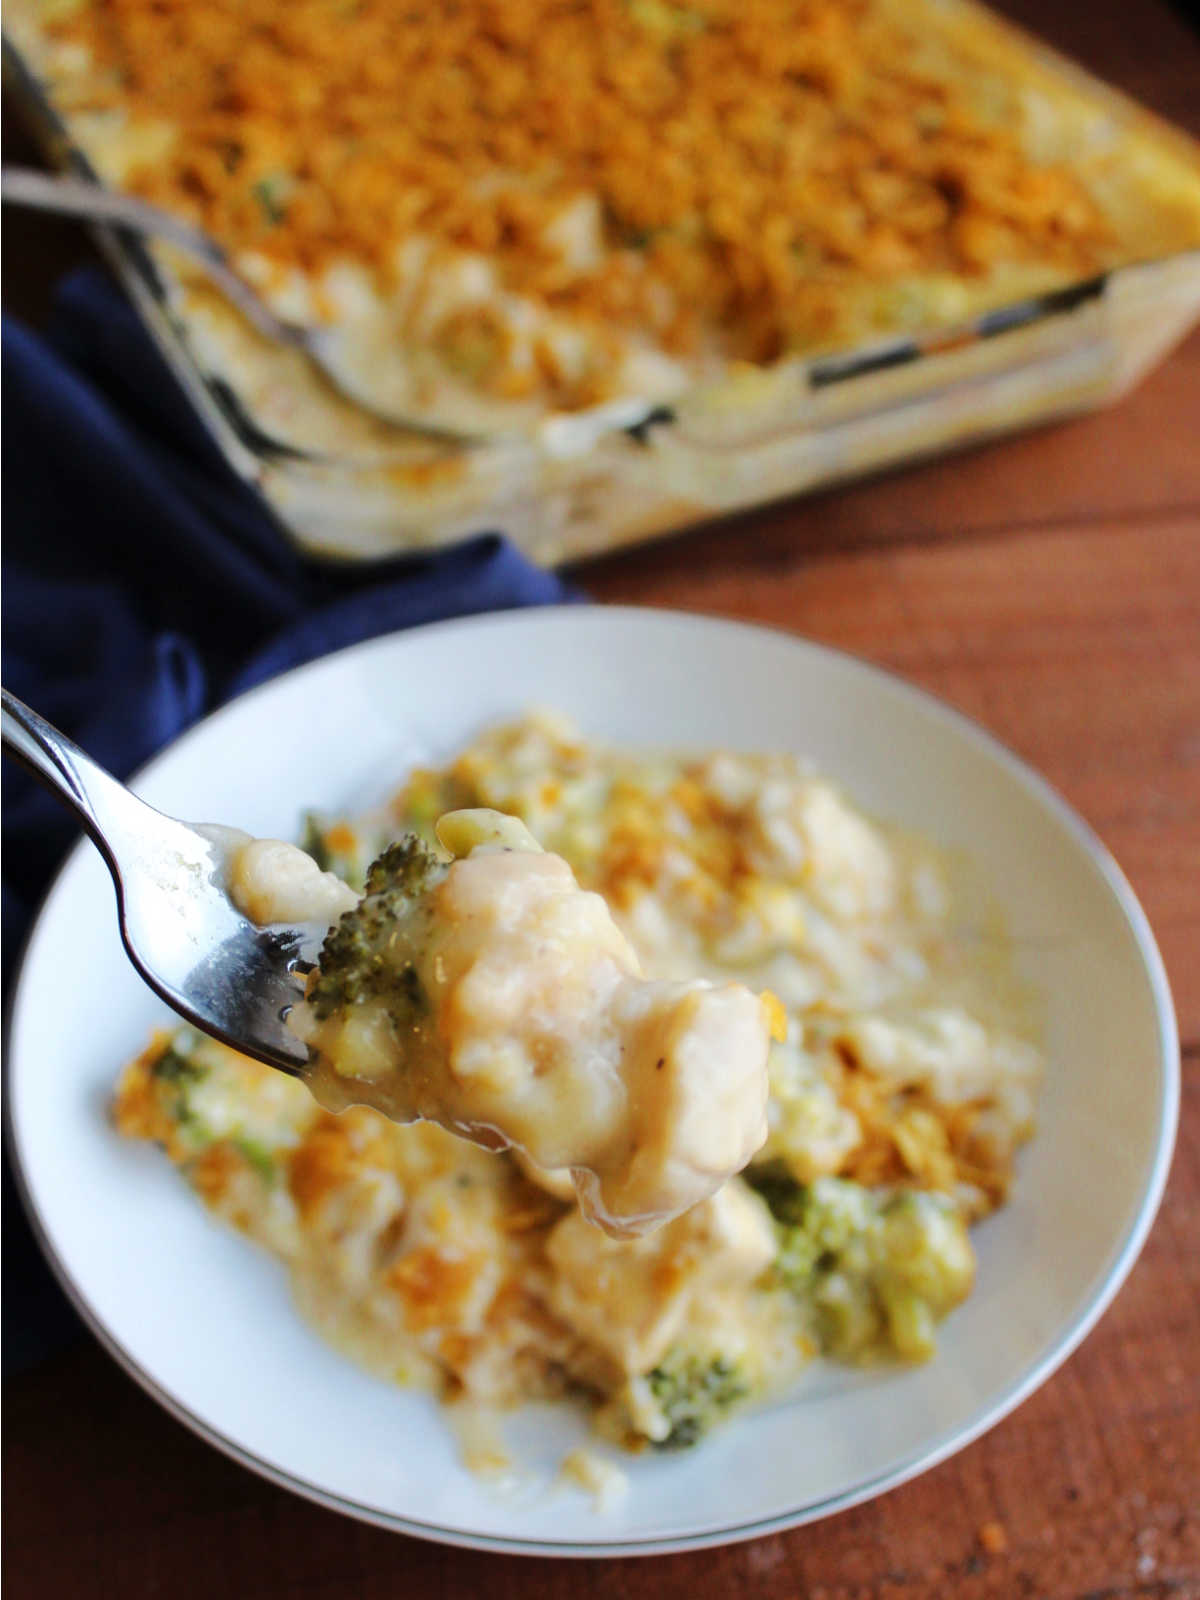 Bite of cheesy chicken broccoli rice casserole on fork showing thick cheese sauce and chunks of chicken and broccoli. 